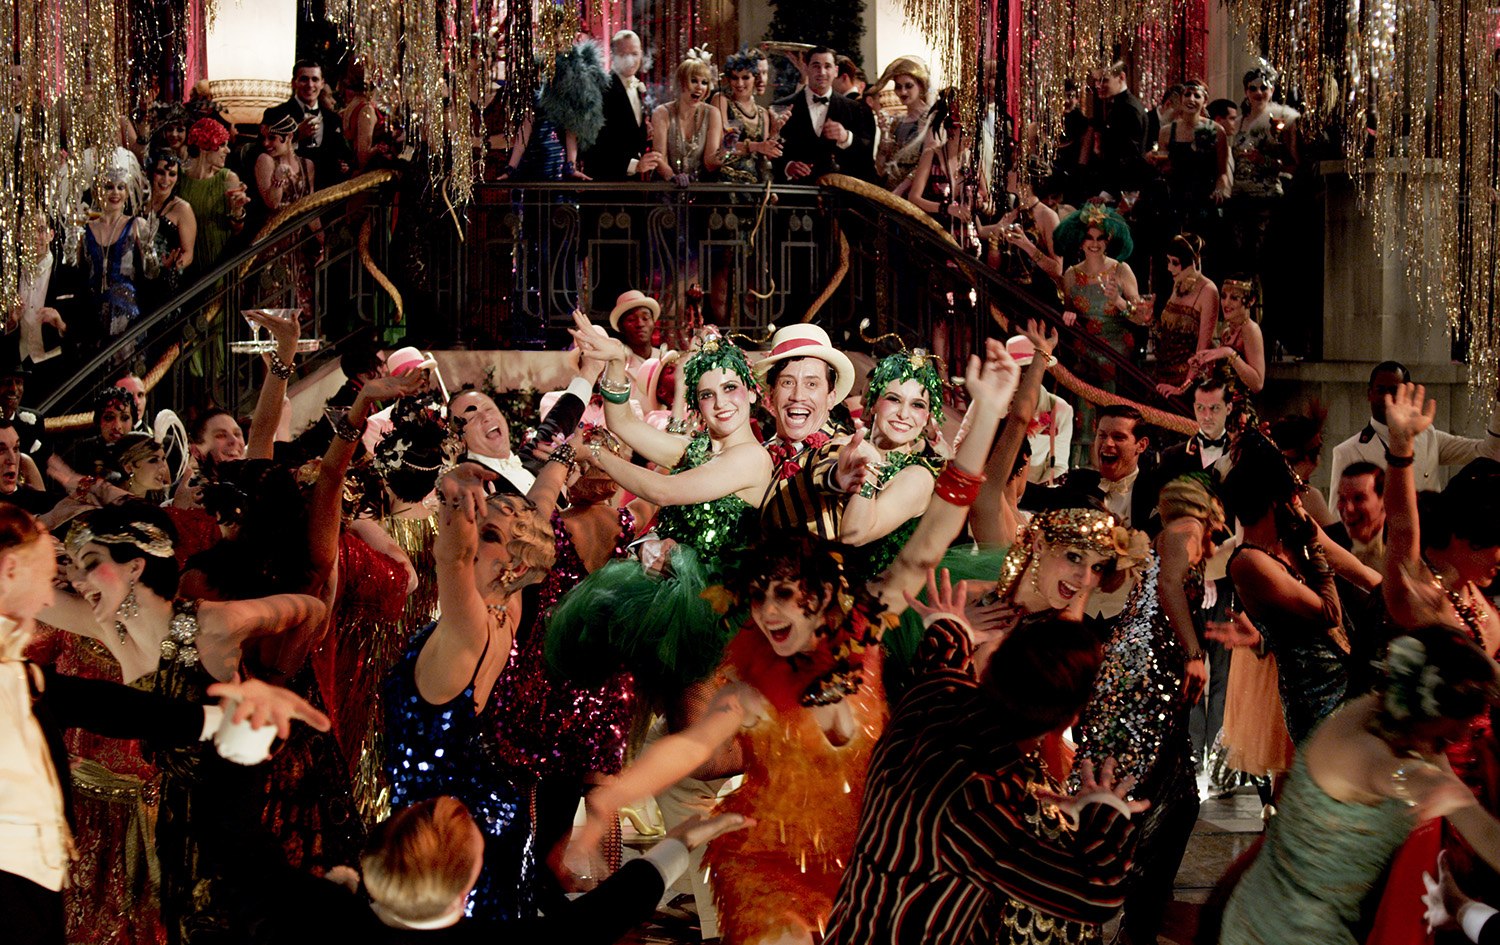 costume design great gatsby, dancing, party